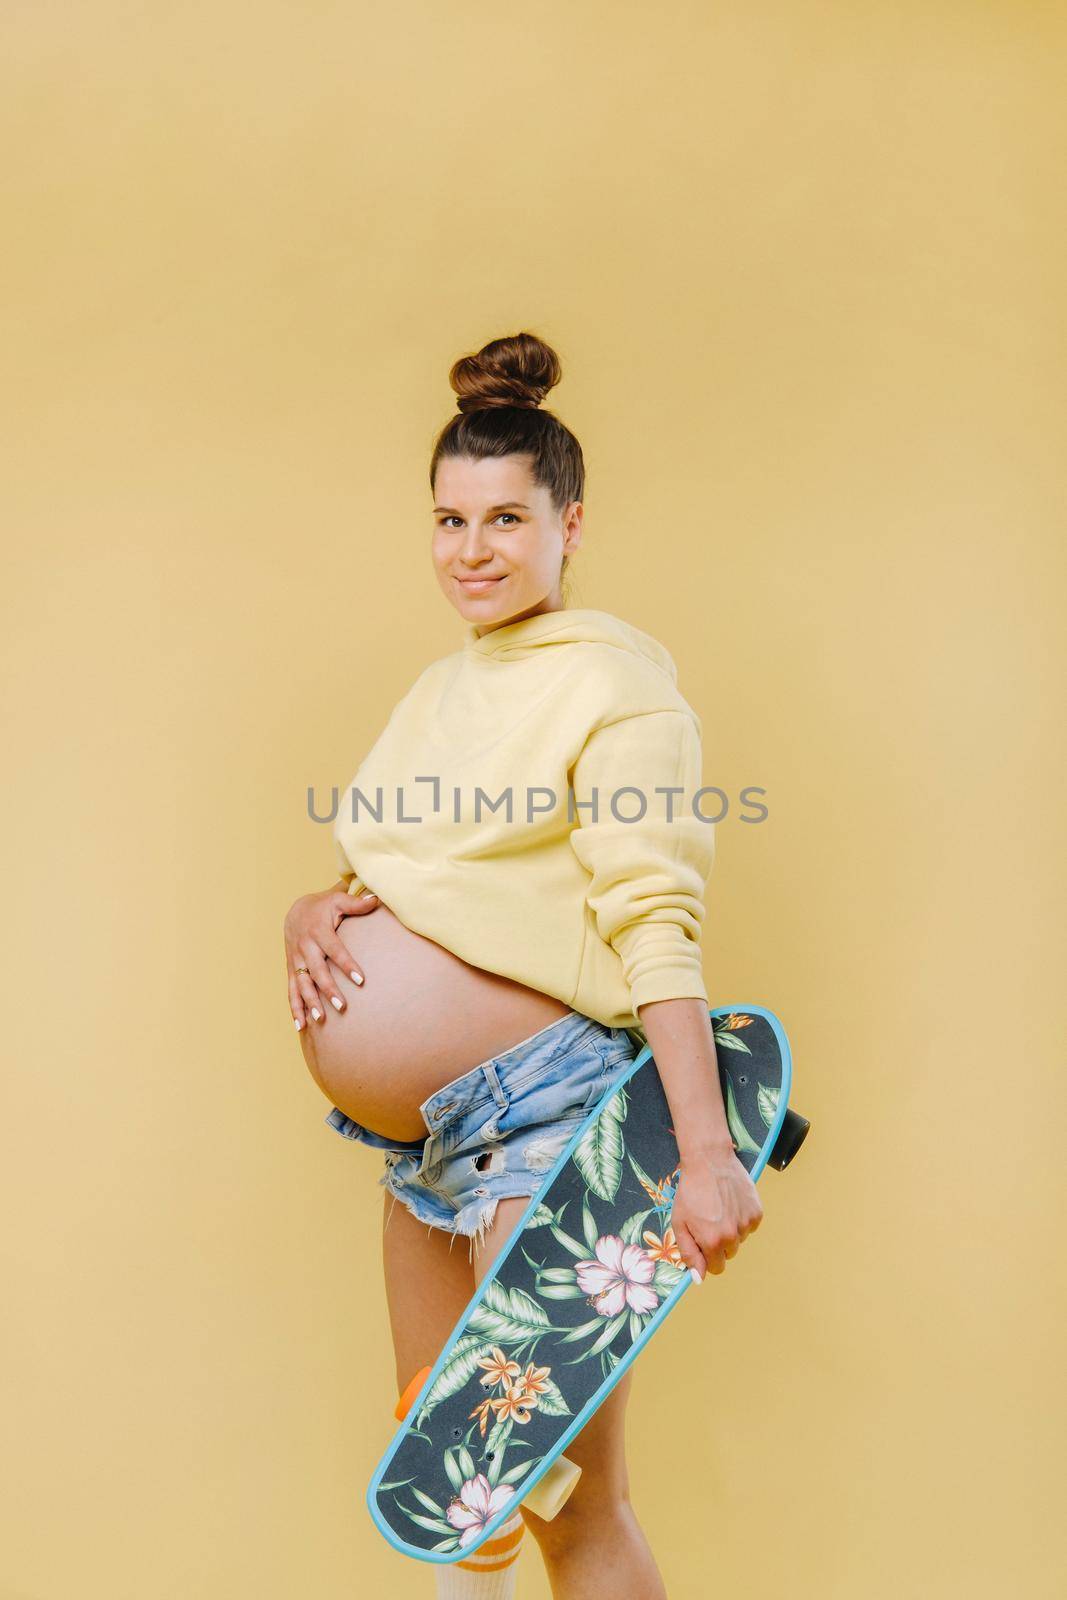 Pregnant girl in a yellow jacket with a skateboard in her hands on a yellow background by Lobachad